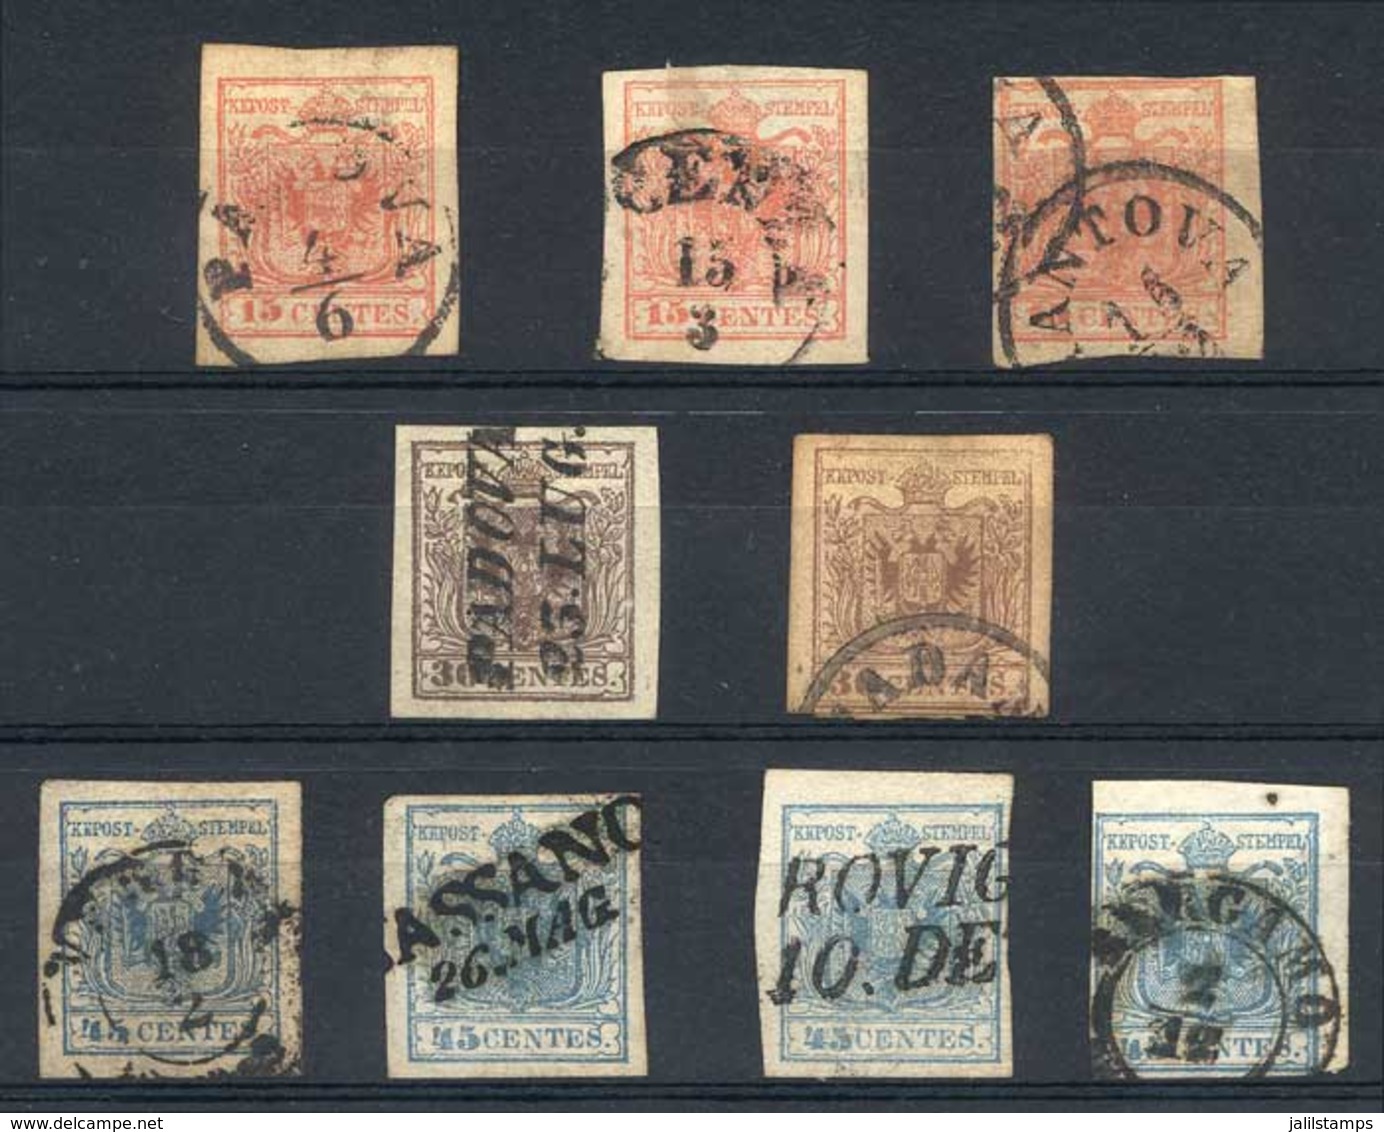 ITALY: Stockbook With Sc.4, 4b, 4f, 5, 5e, 6, 6a (x2), 6c, All Used And In General With Good Margins And Nice Postmarks, - Lombardy-Venetia